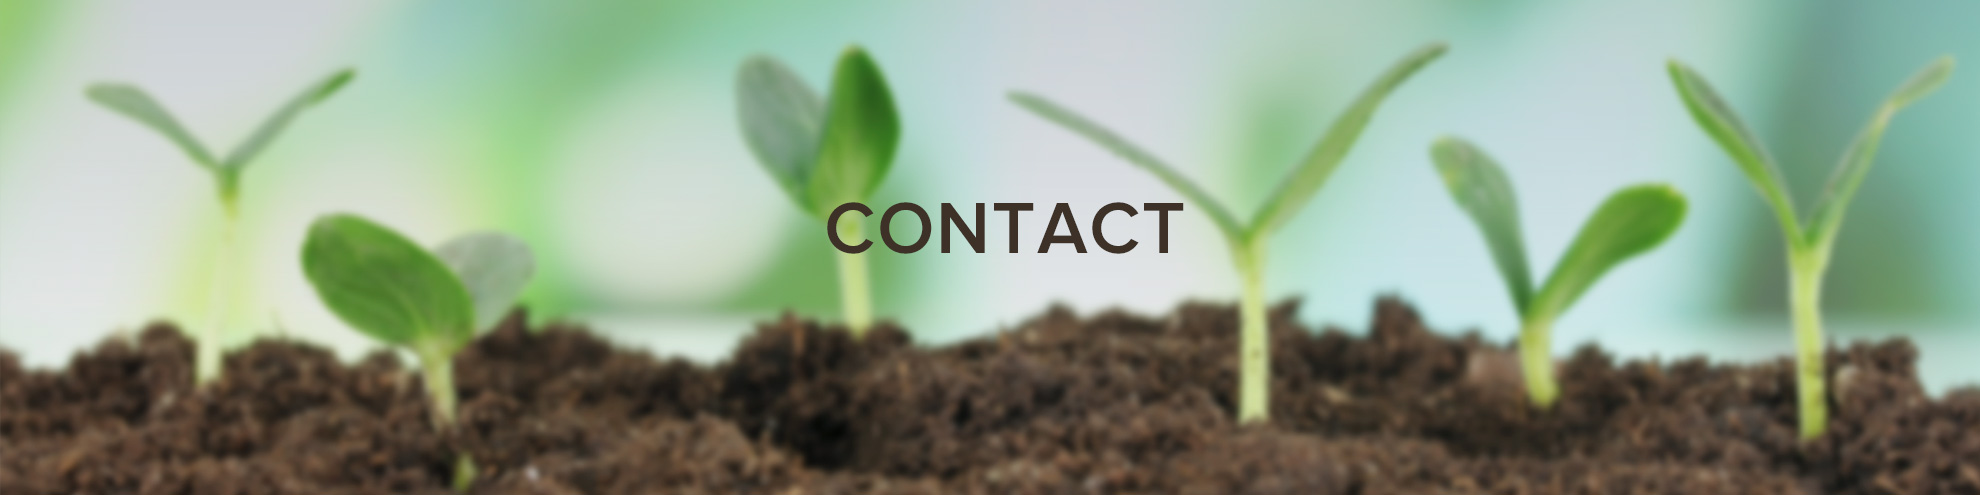 MLAB_banners_CONTACT.jpg